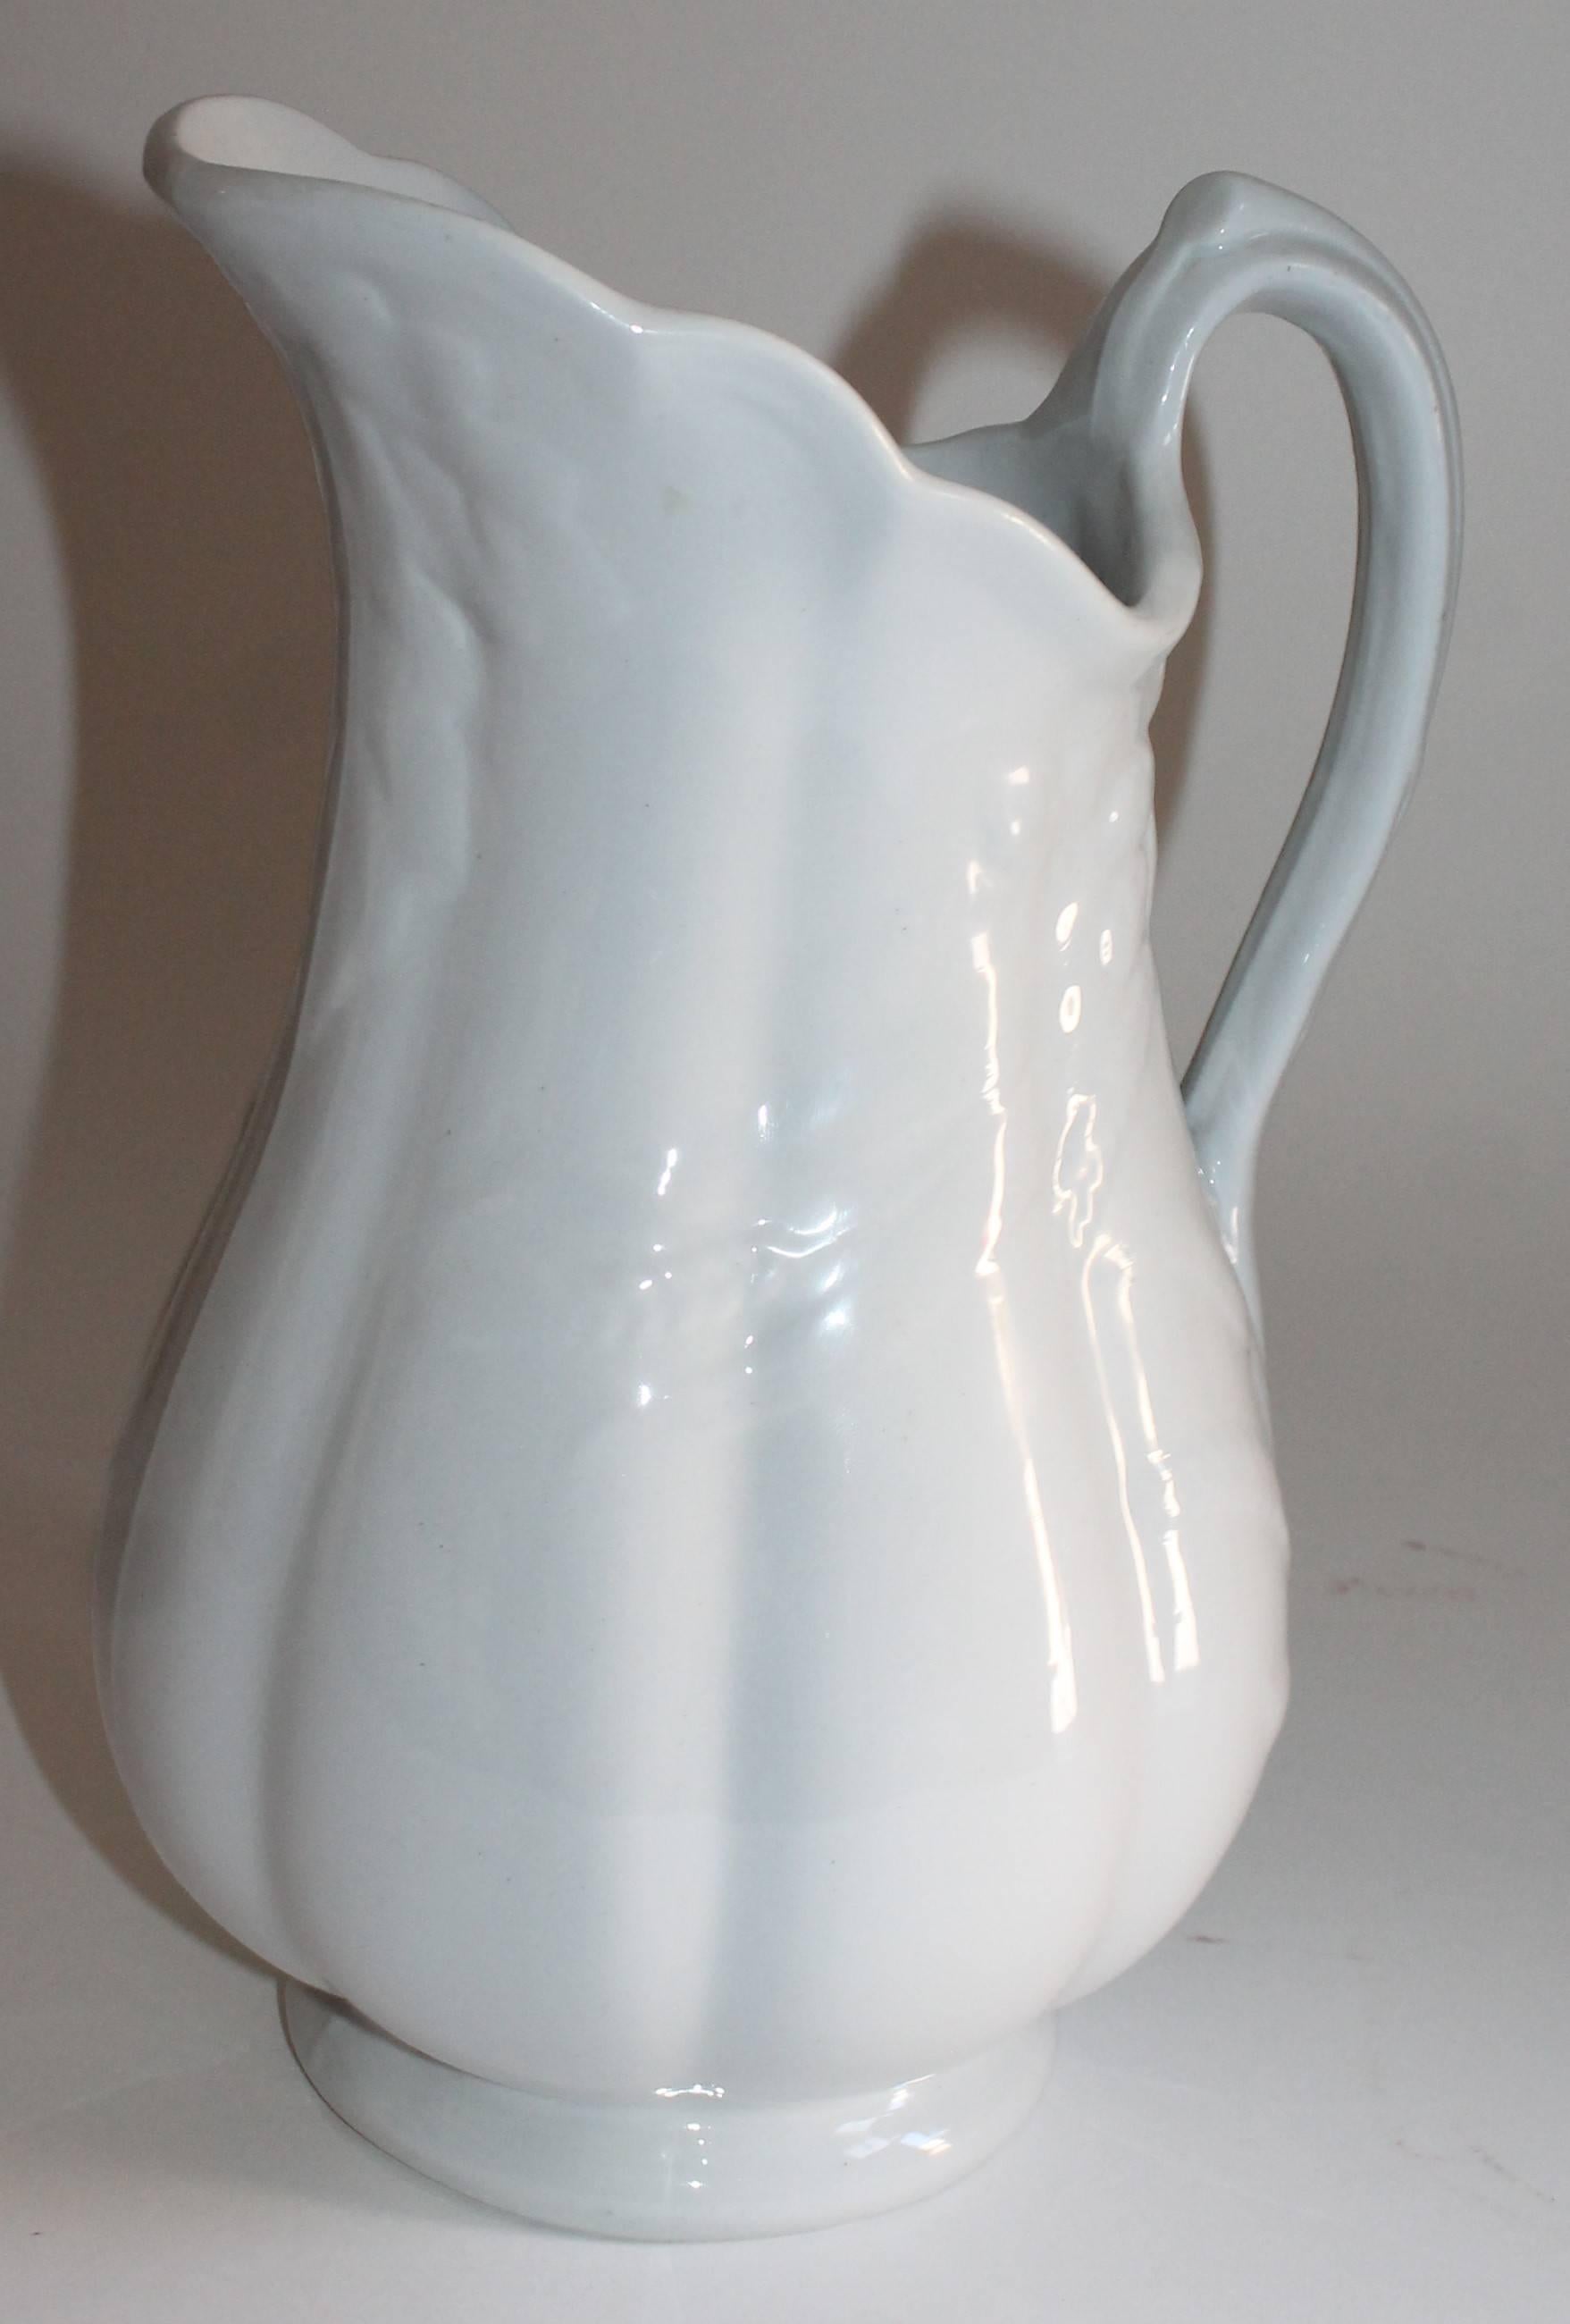 Other 19th Century Ironstone Wheat Water Pitchers